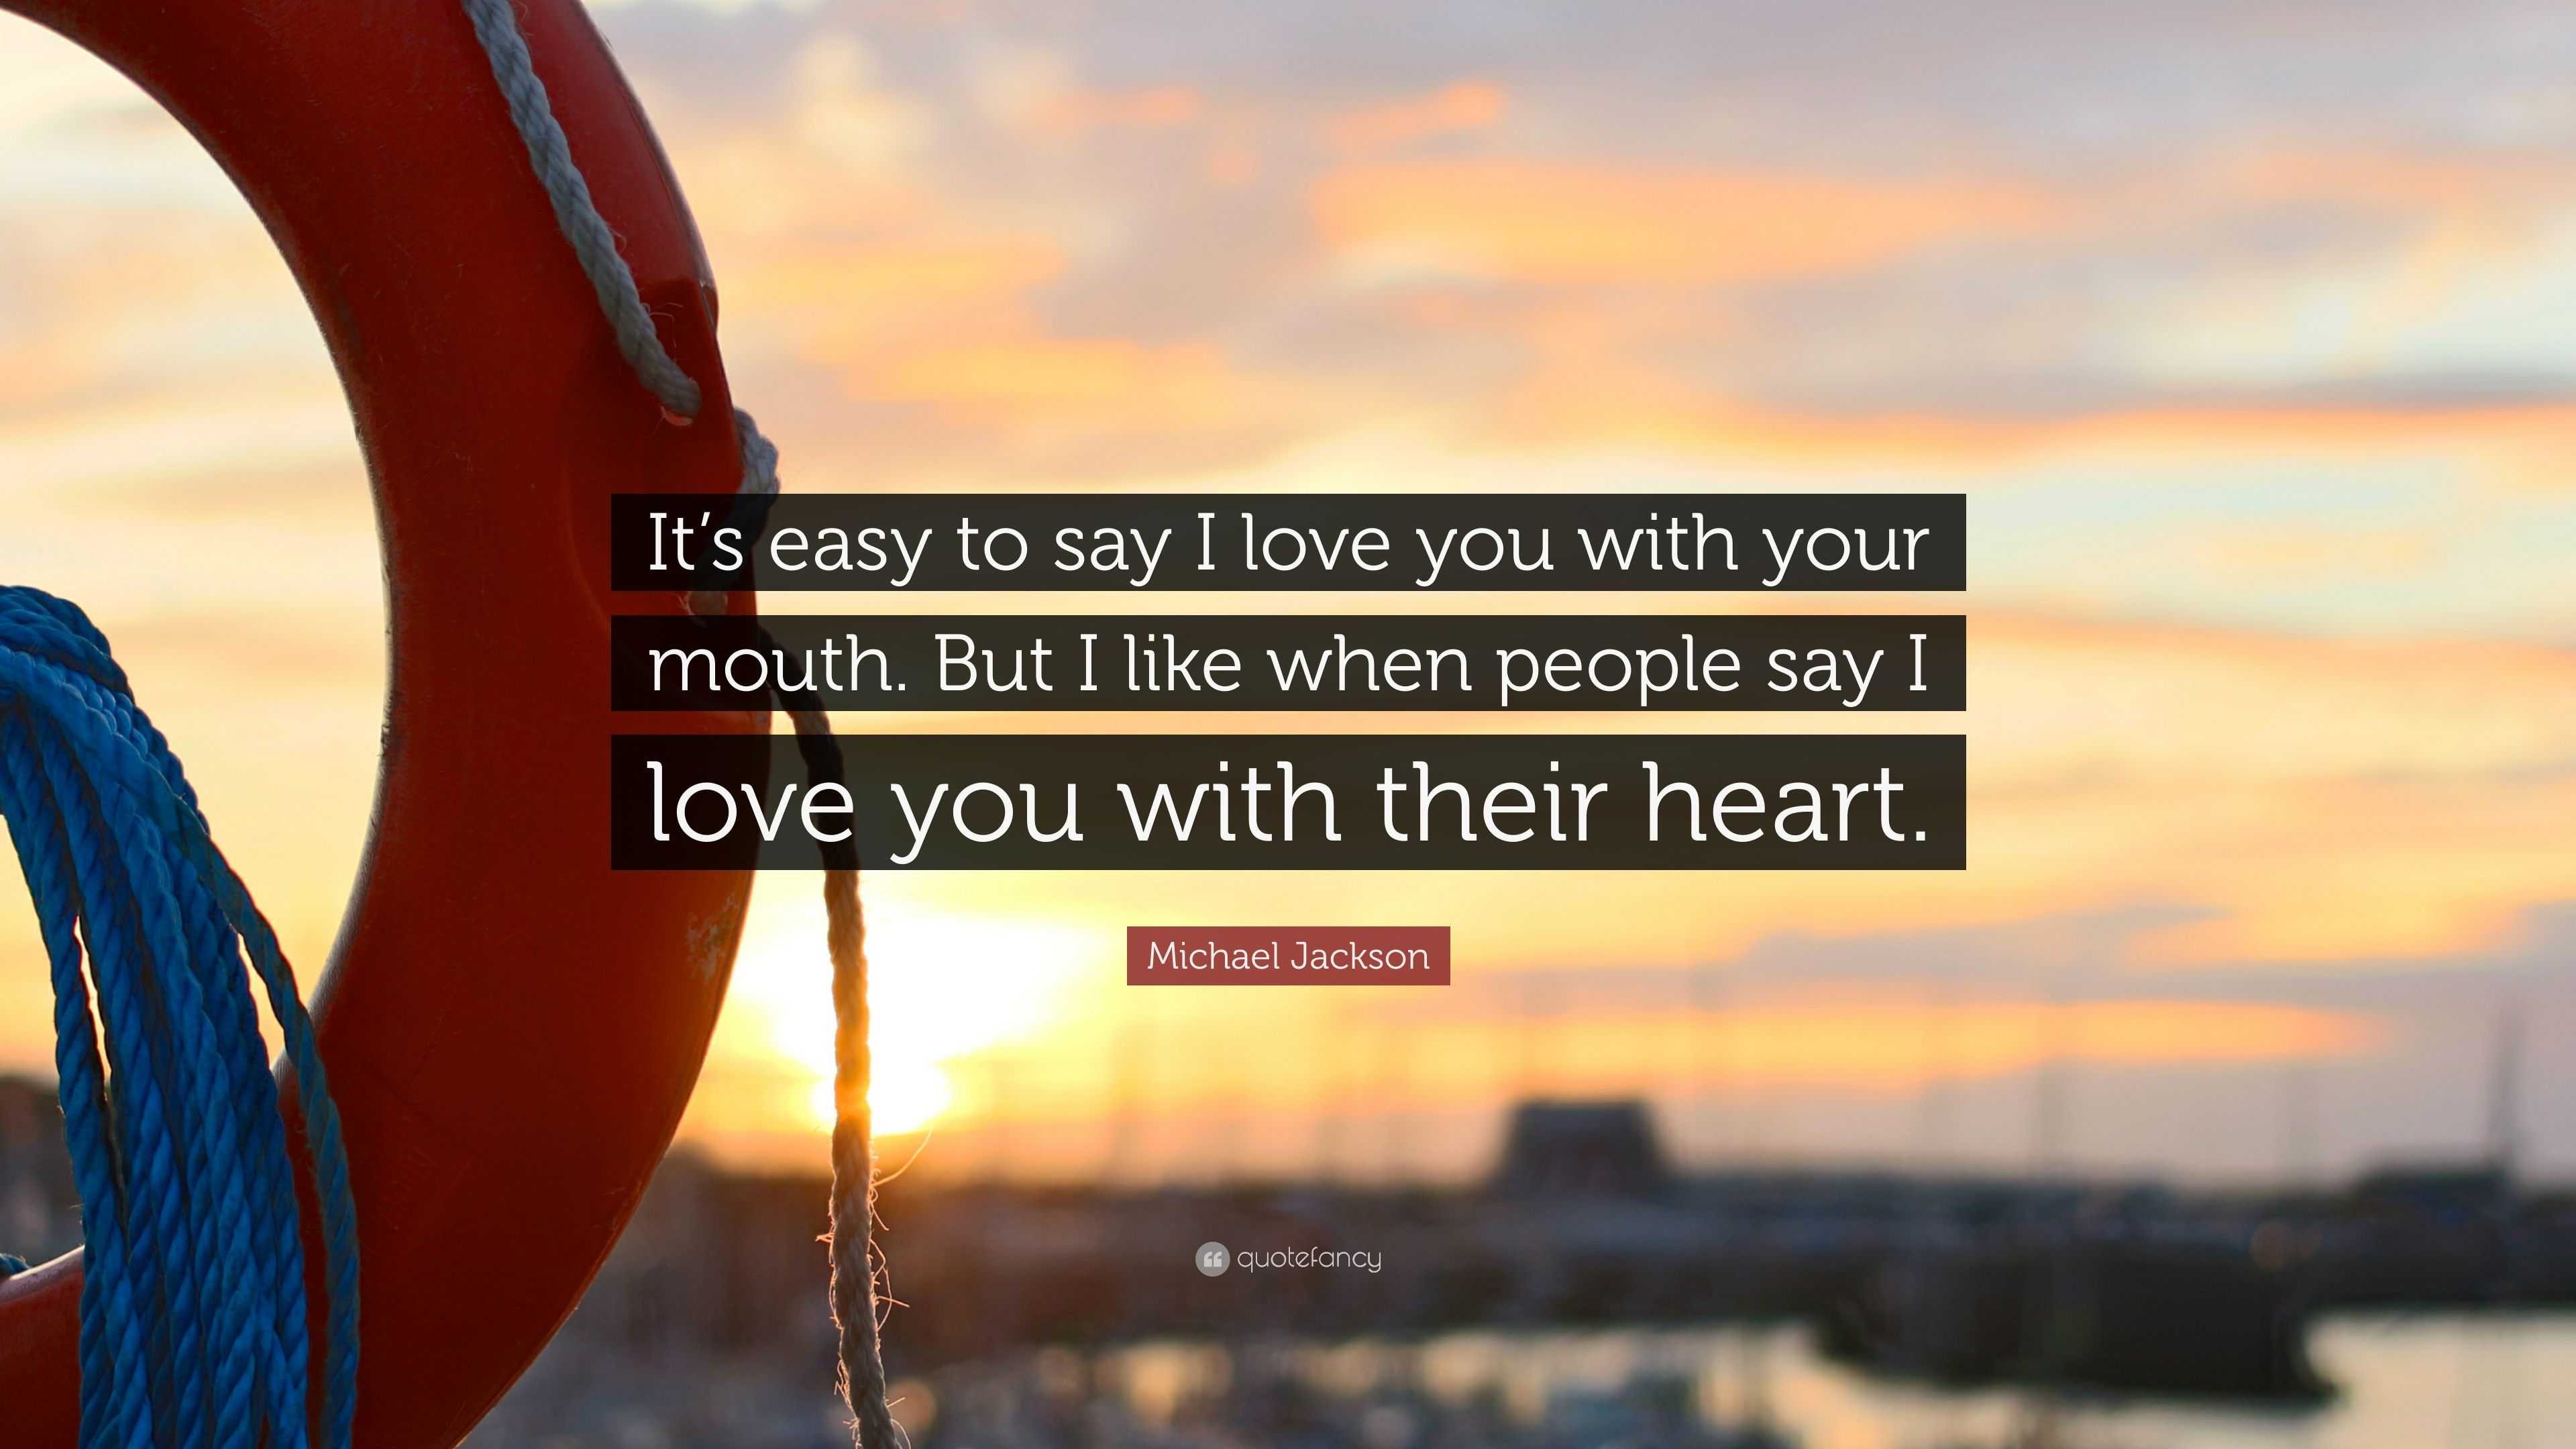 Michael Jackson Quote “It s easy to say I love you with your mouth